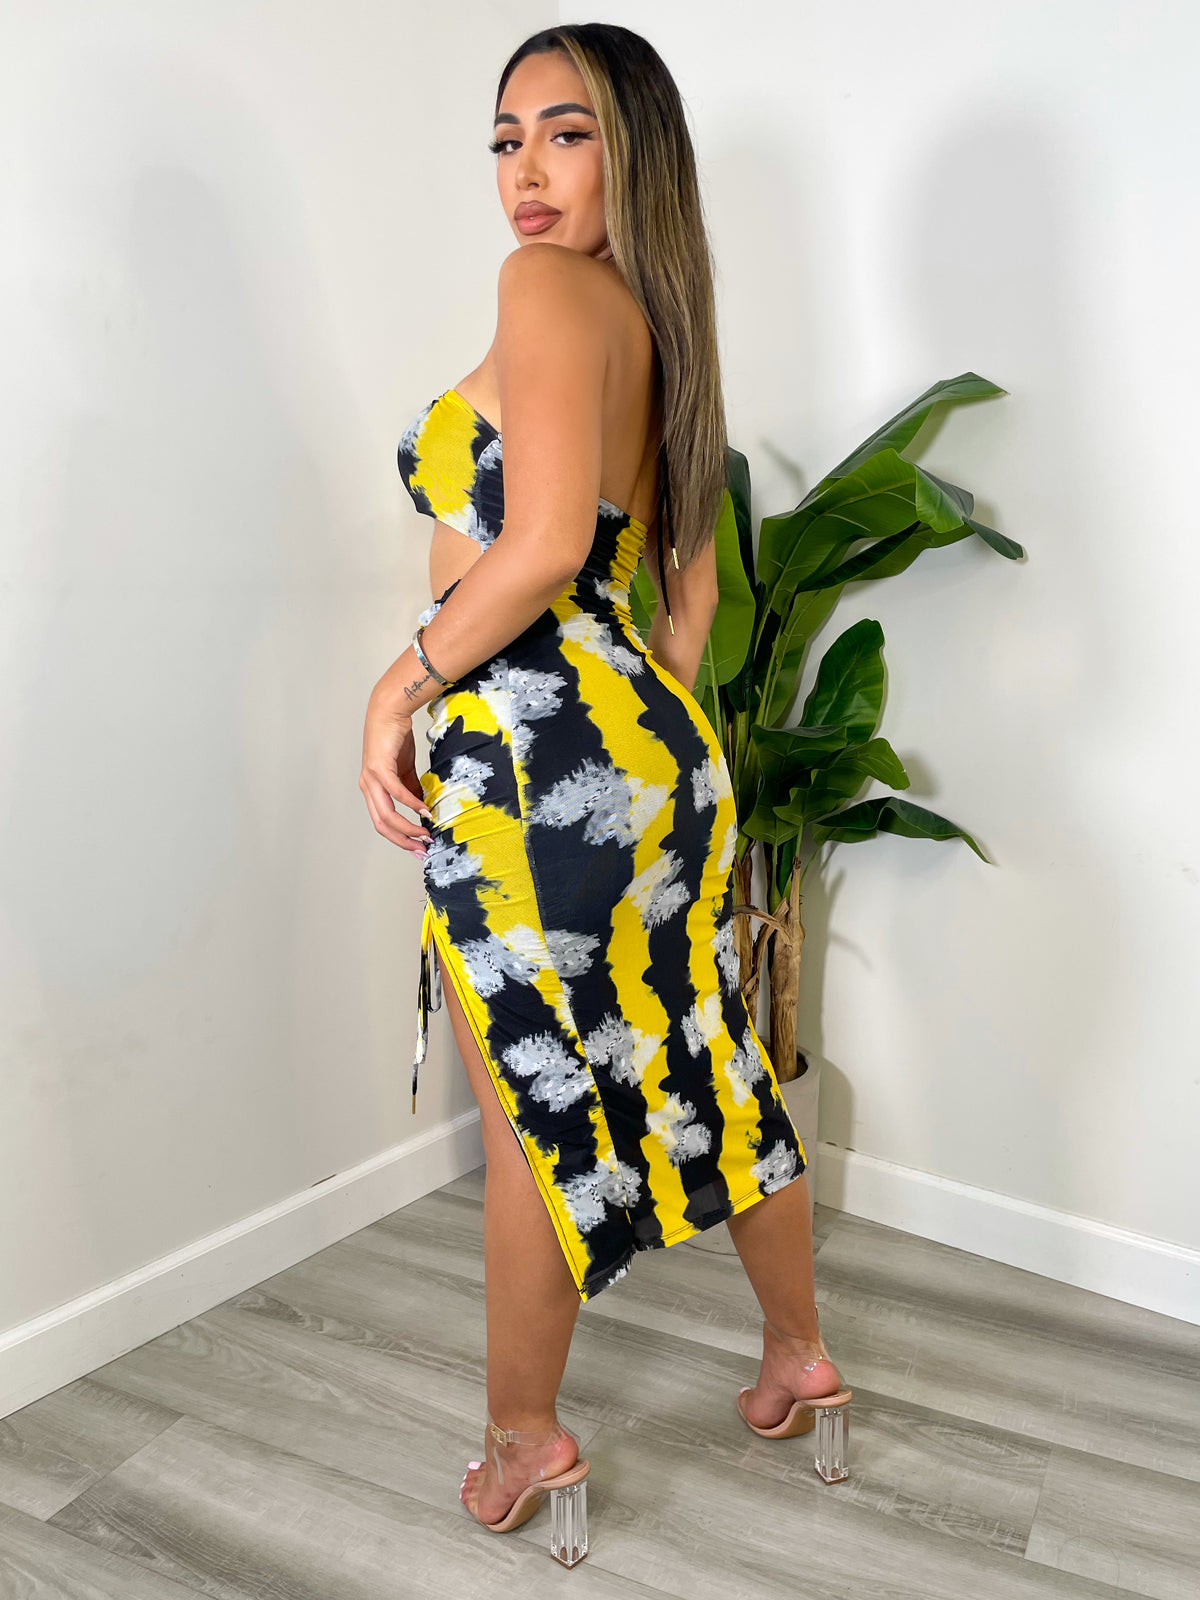 black/yellow dress, halter neck, middle cut out, bodycon, side slit, scrunch tie, mid calf length